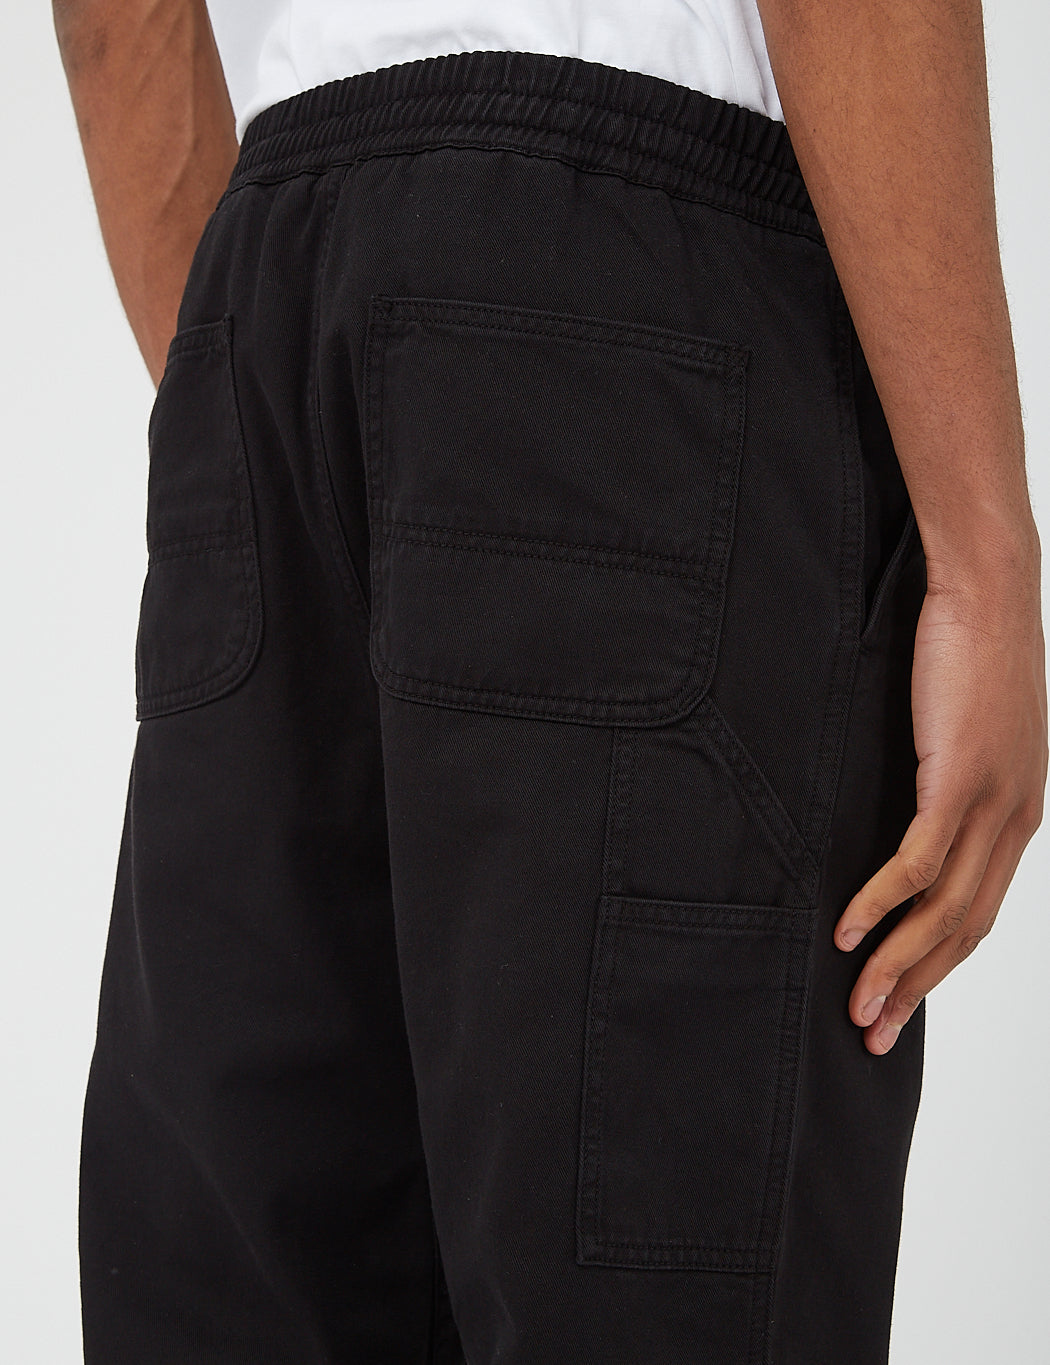 Carhartt-WIP Carson Pant (Stone Washed) - Black | URBAN EXCESS